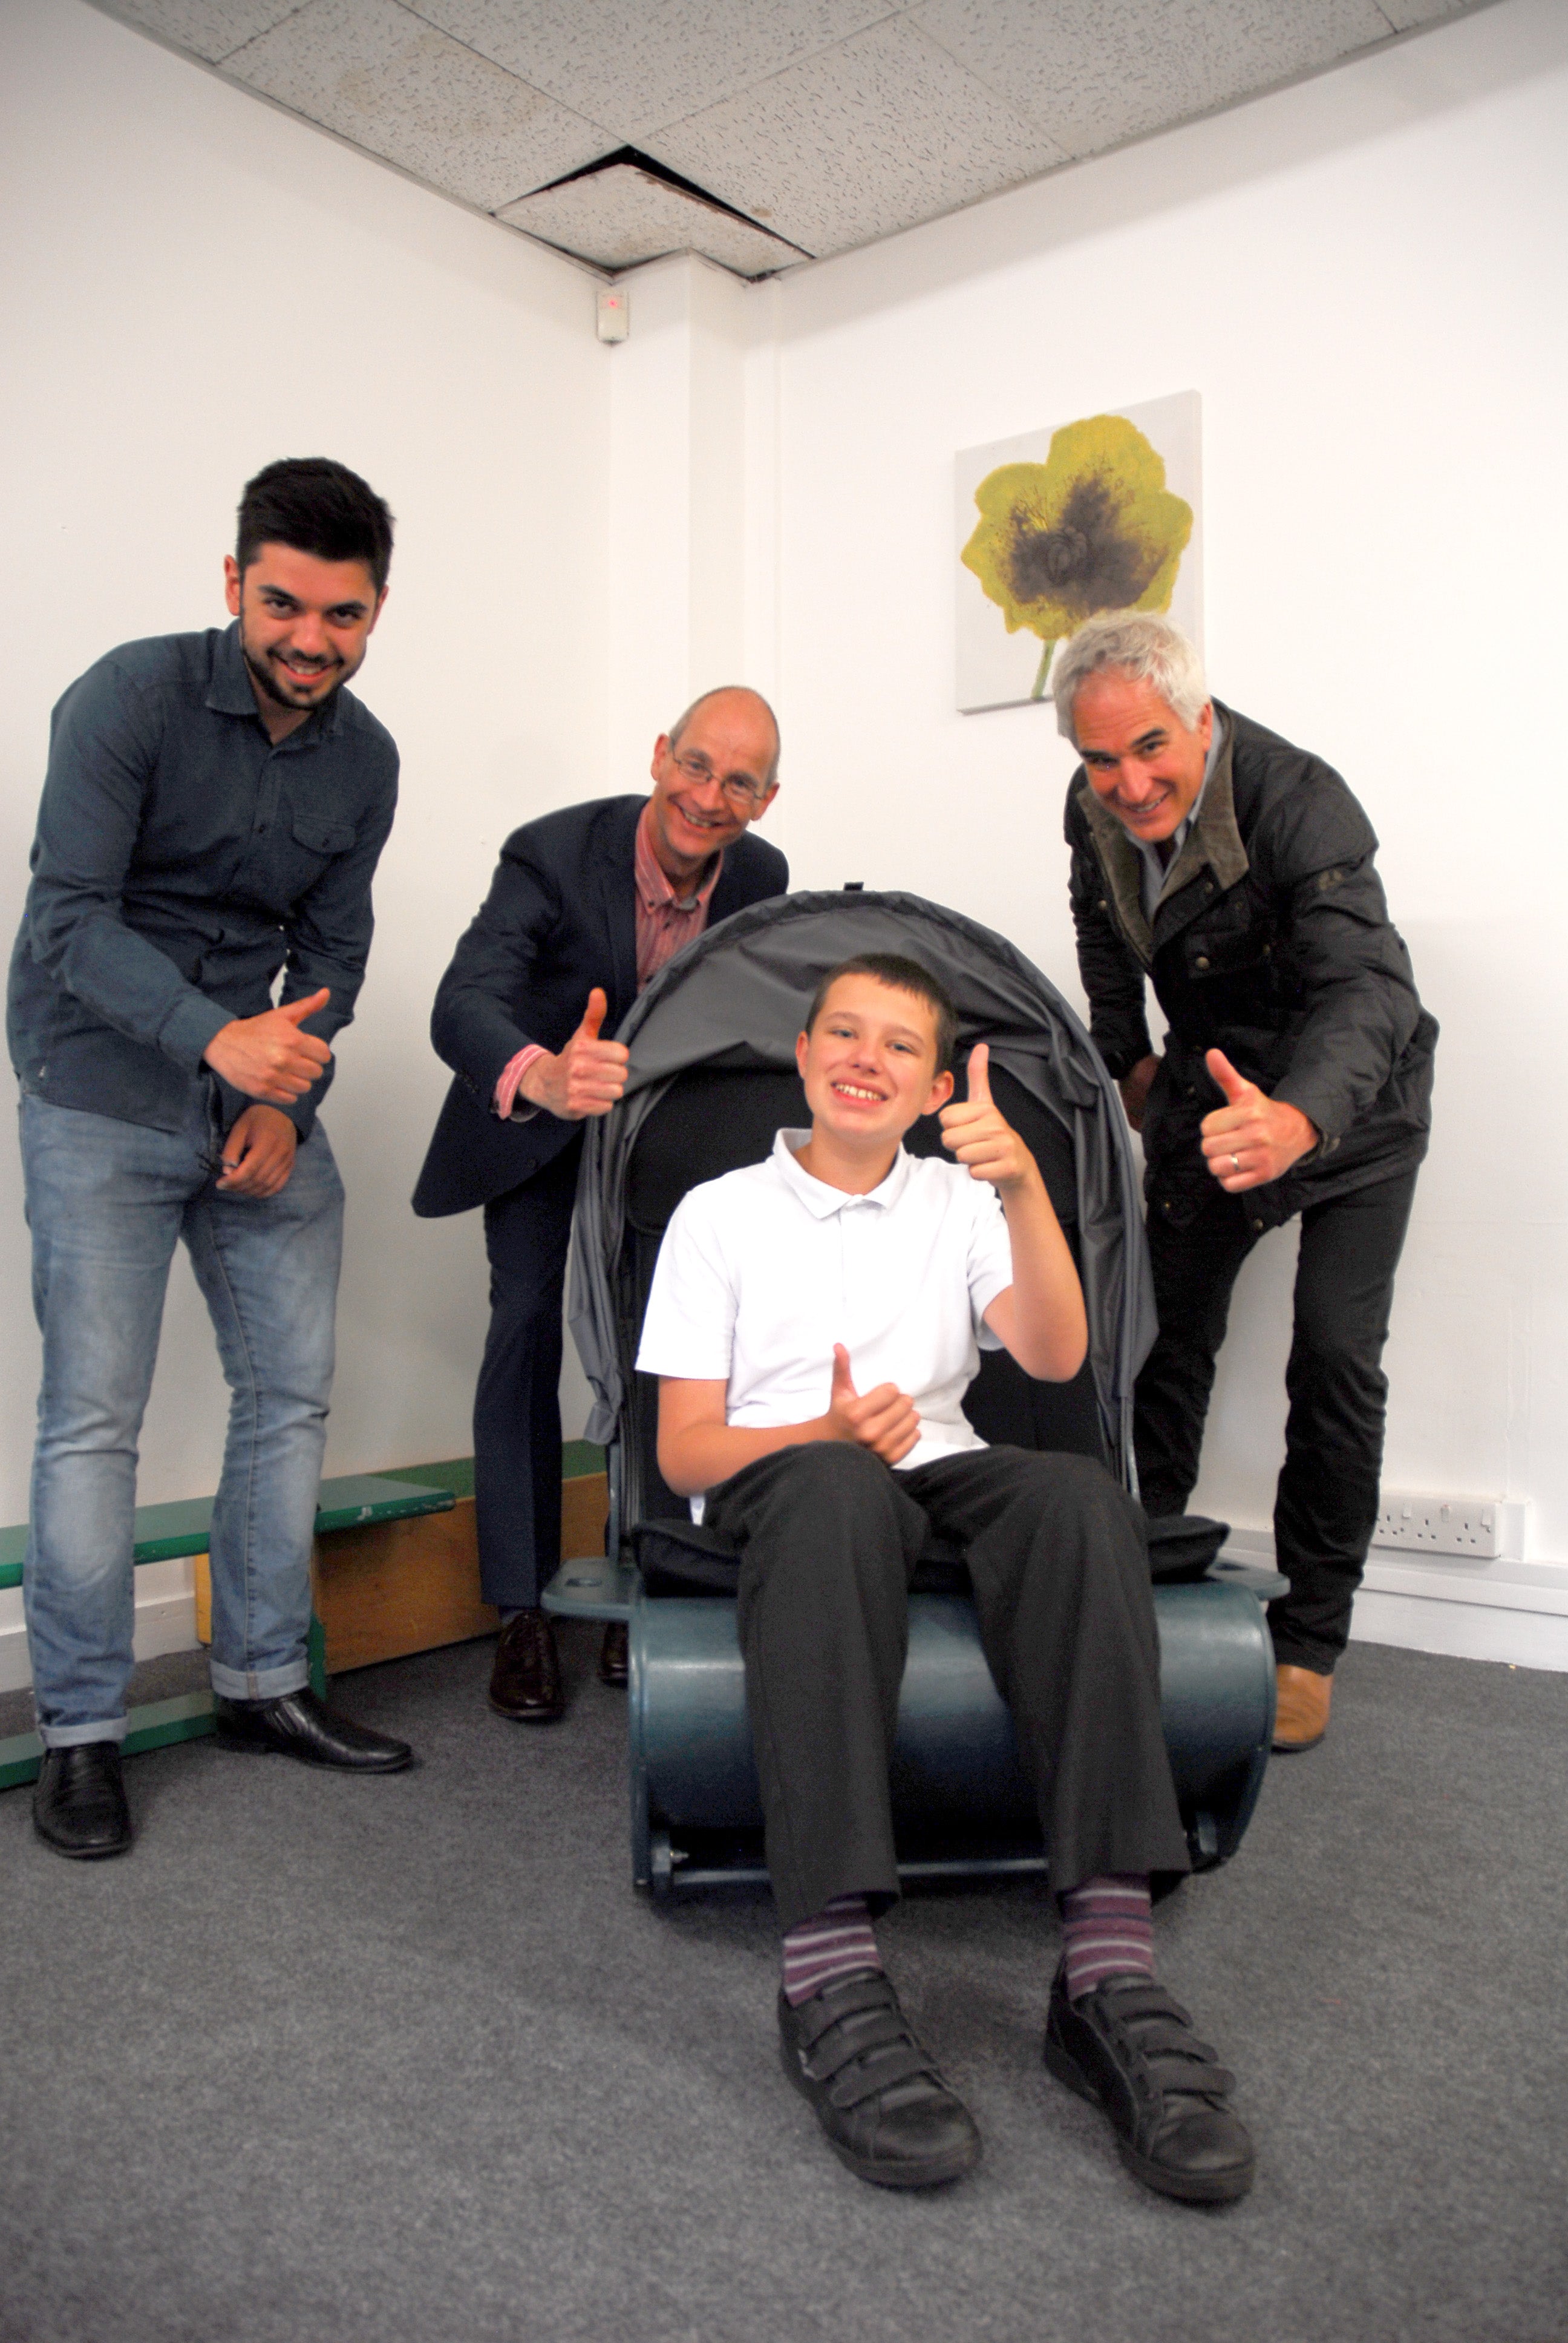 A child in school uniform sits in the sensory chair giving a thumbs up. Three adults also are in the picture giving thumbs up